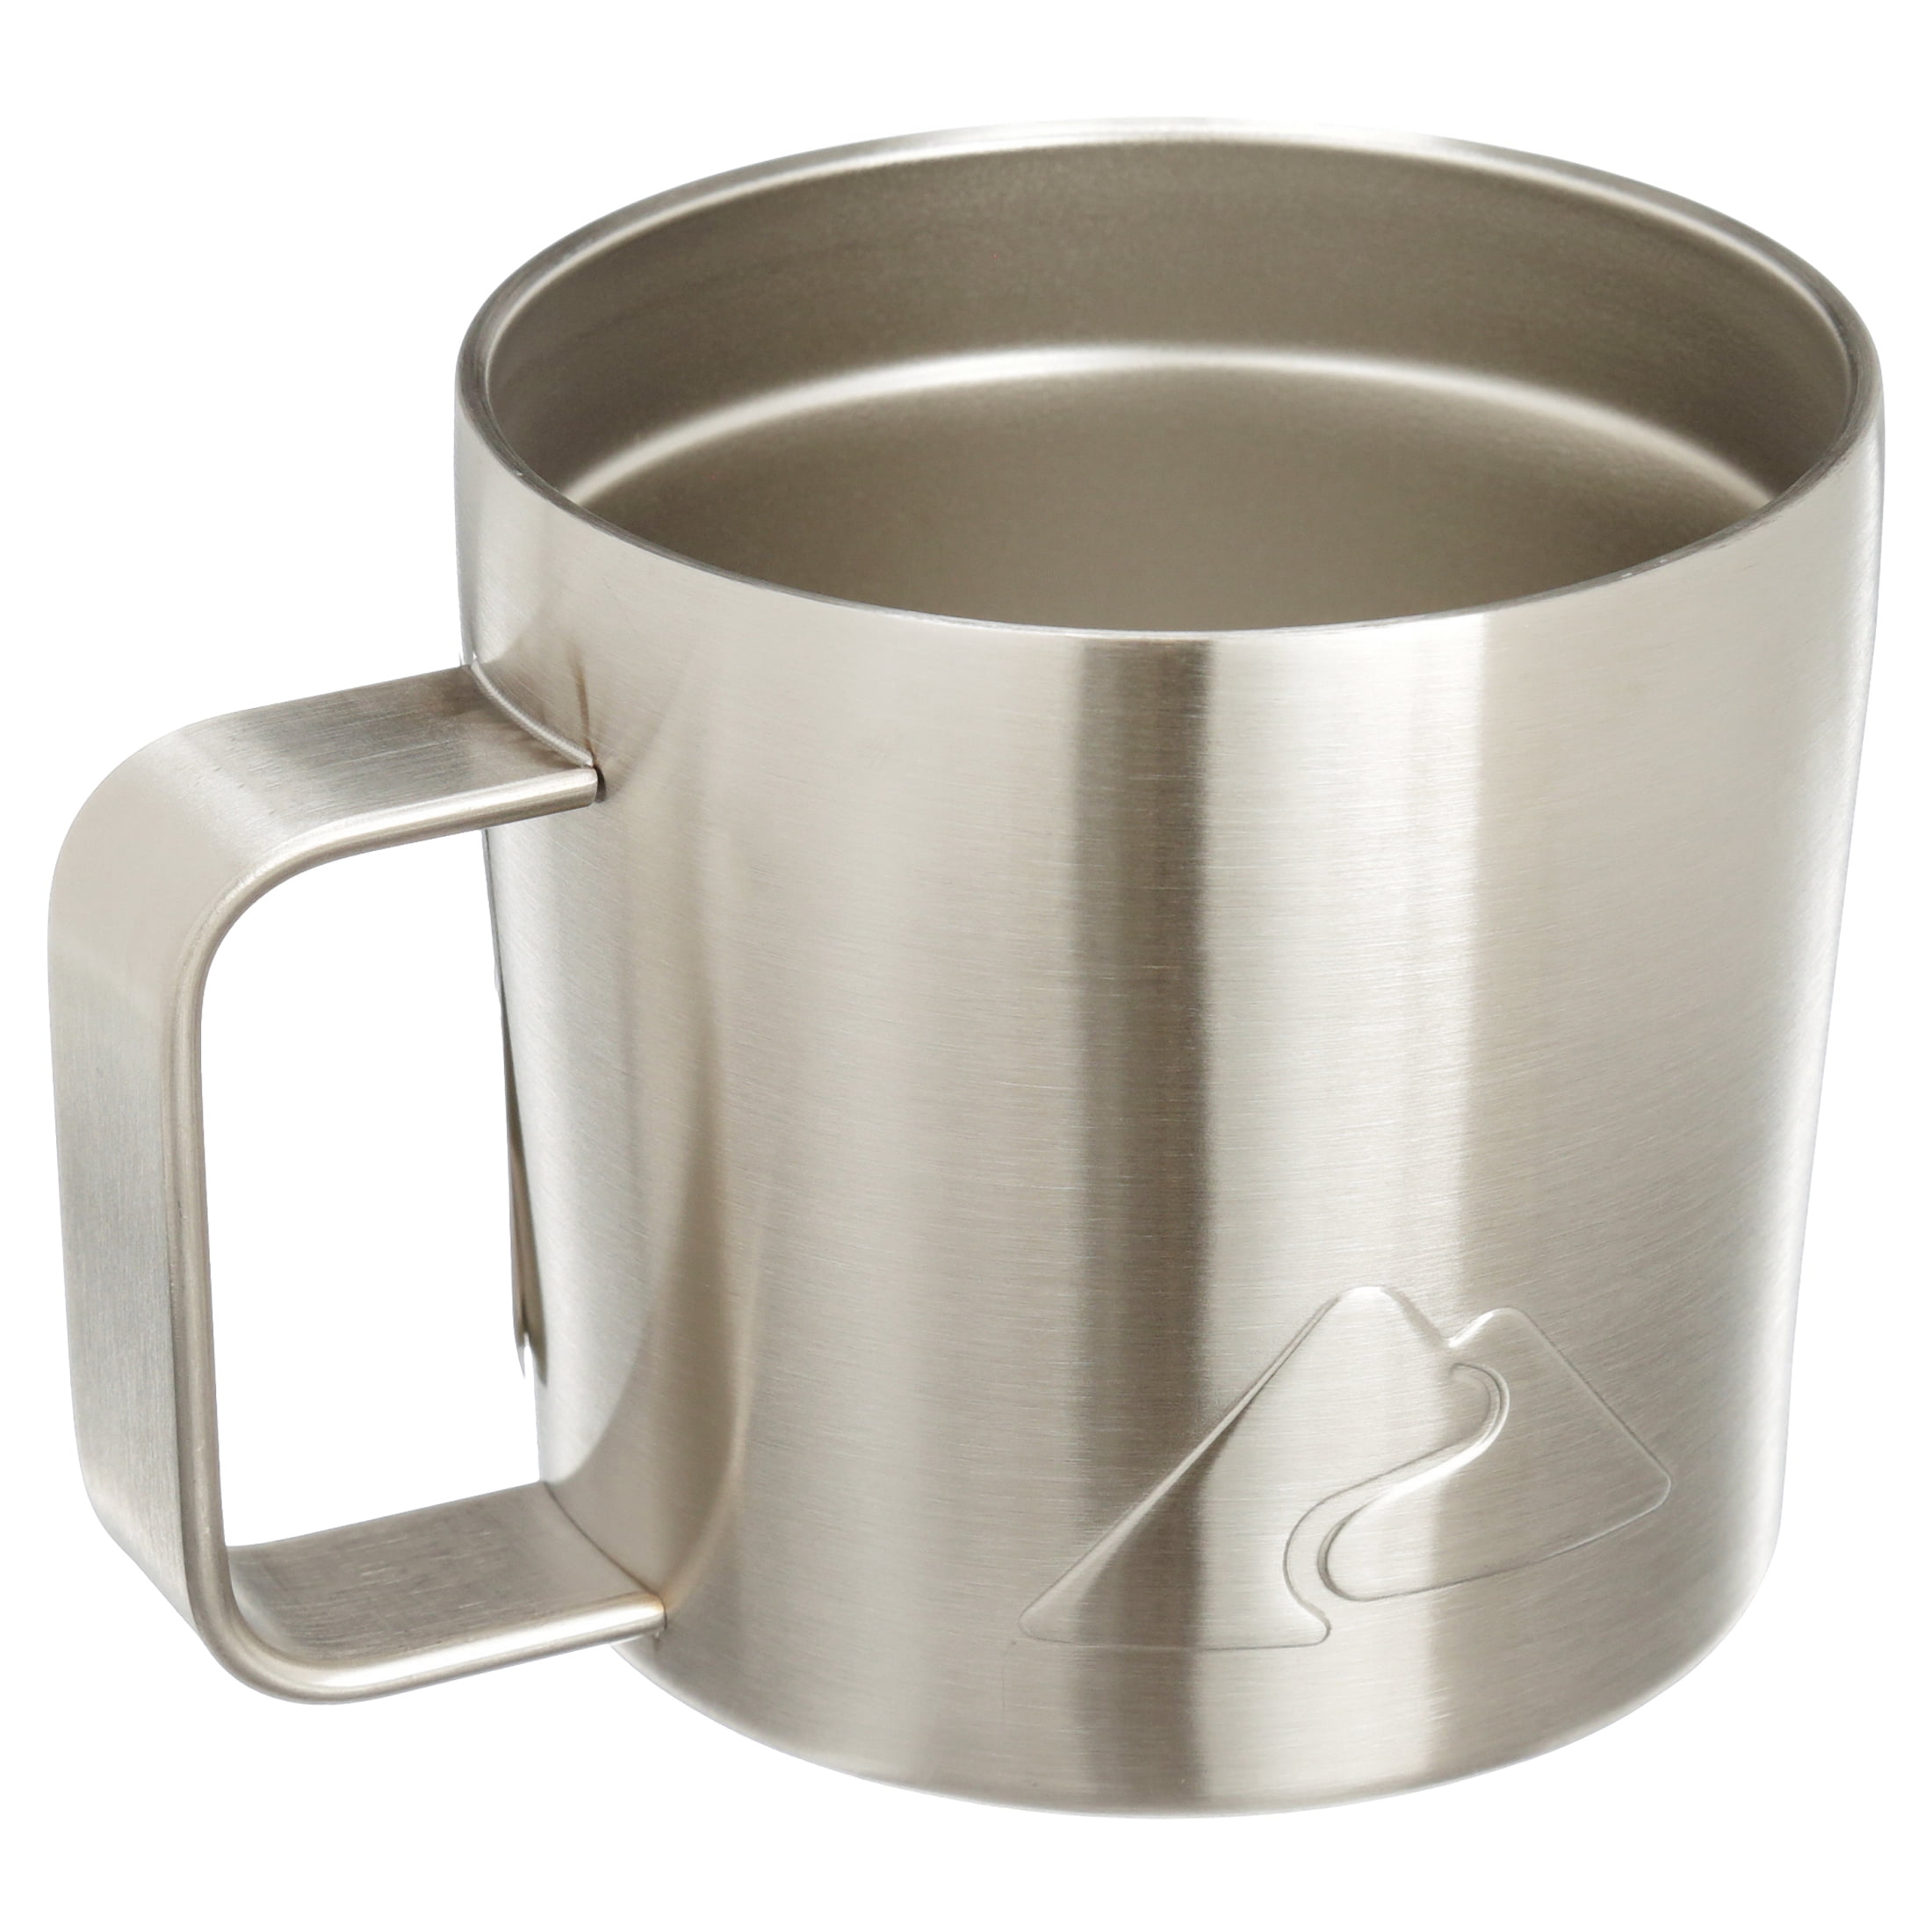 Stainless Steel Insulated Double Wall Travel Coffee Tea Mug Cup 14 Oz —  AllTopBargains